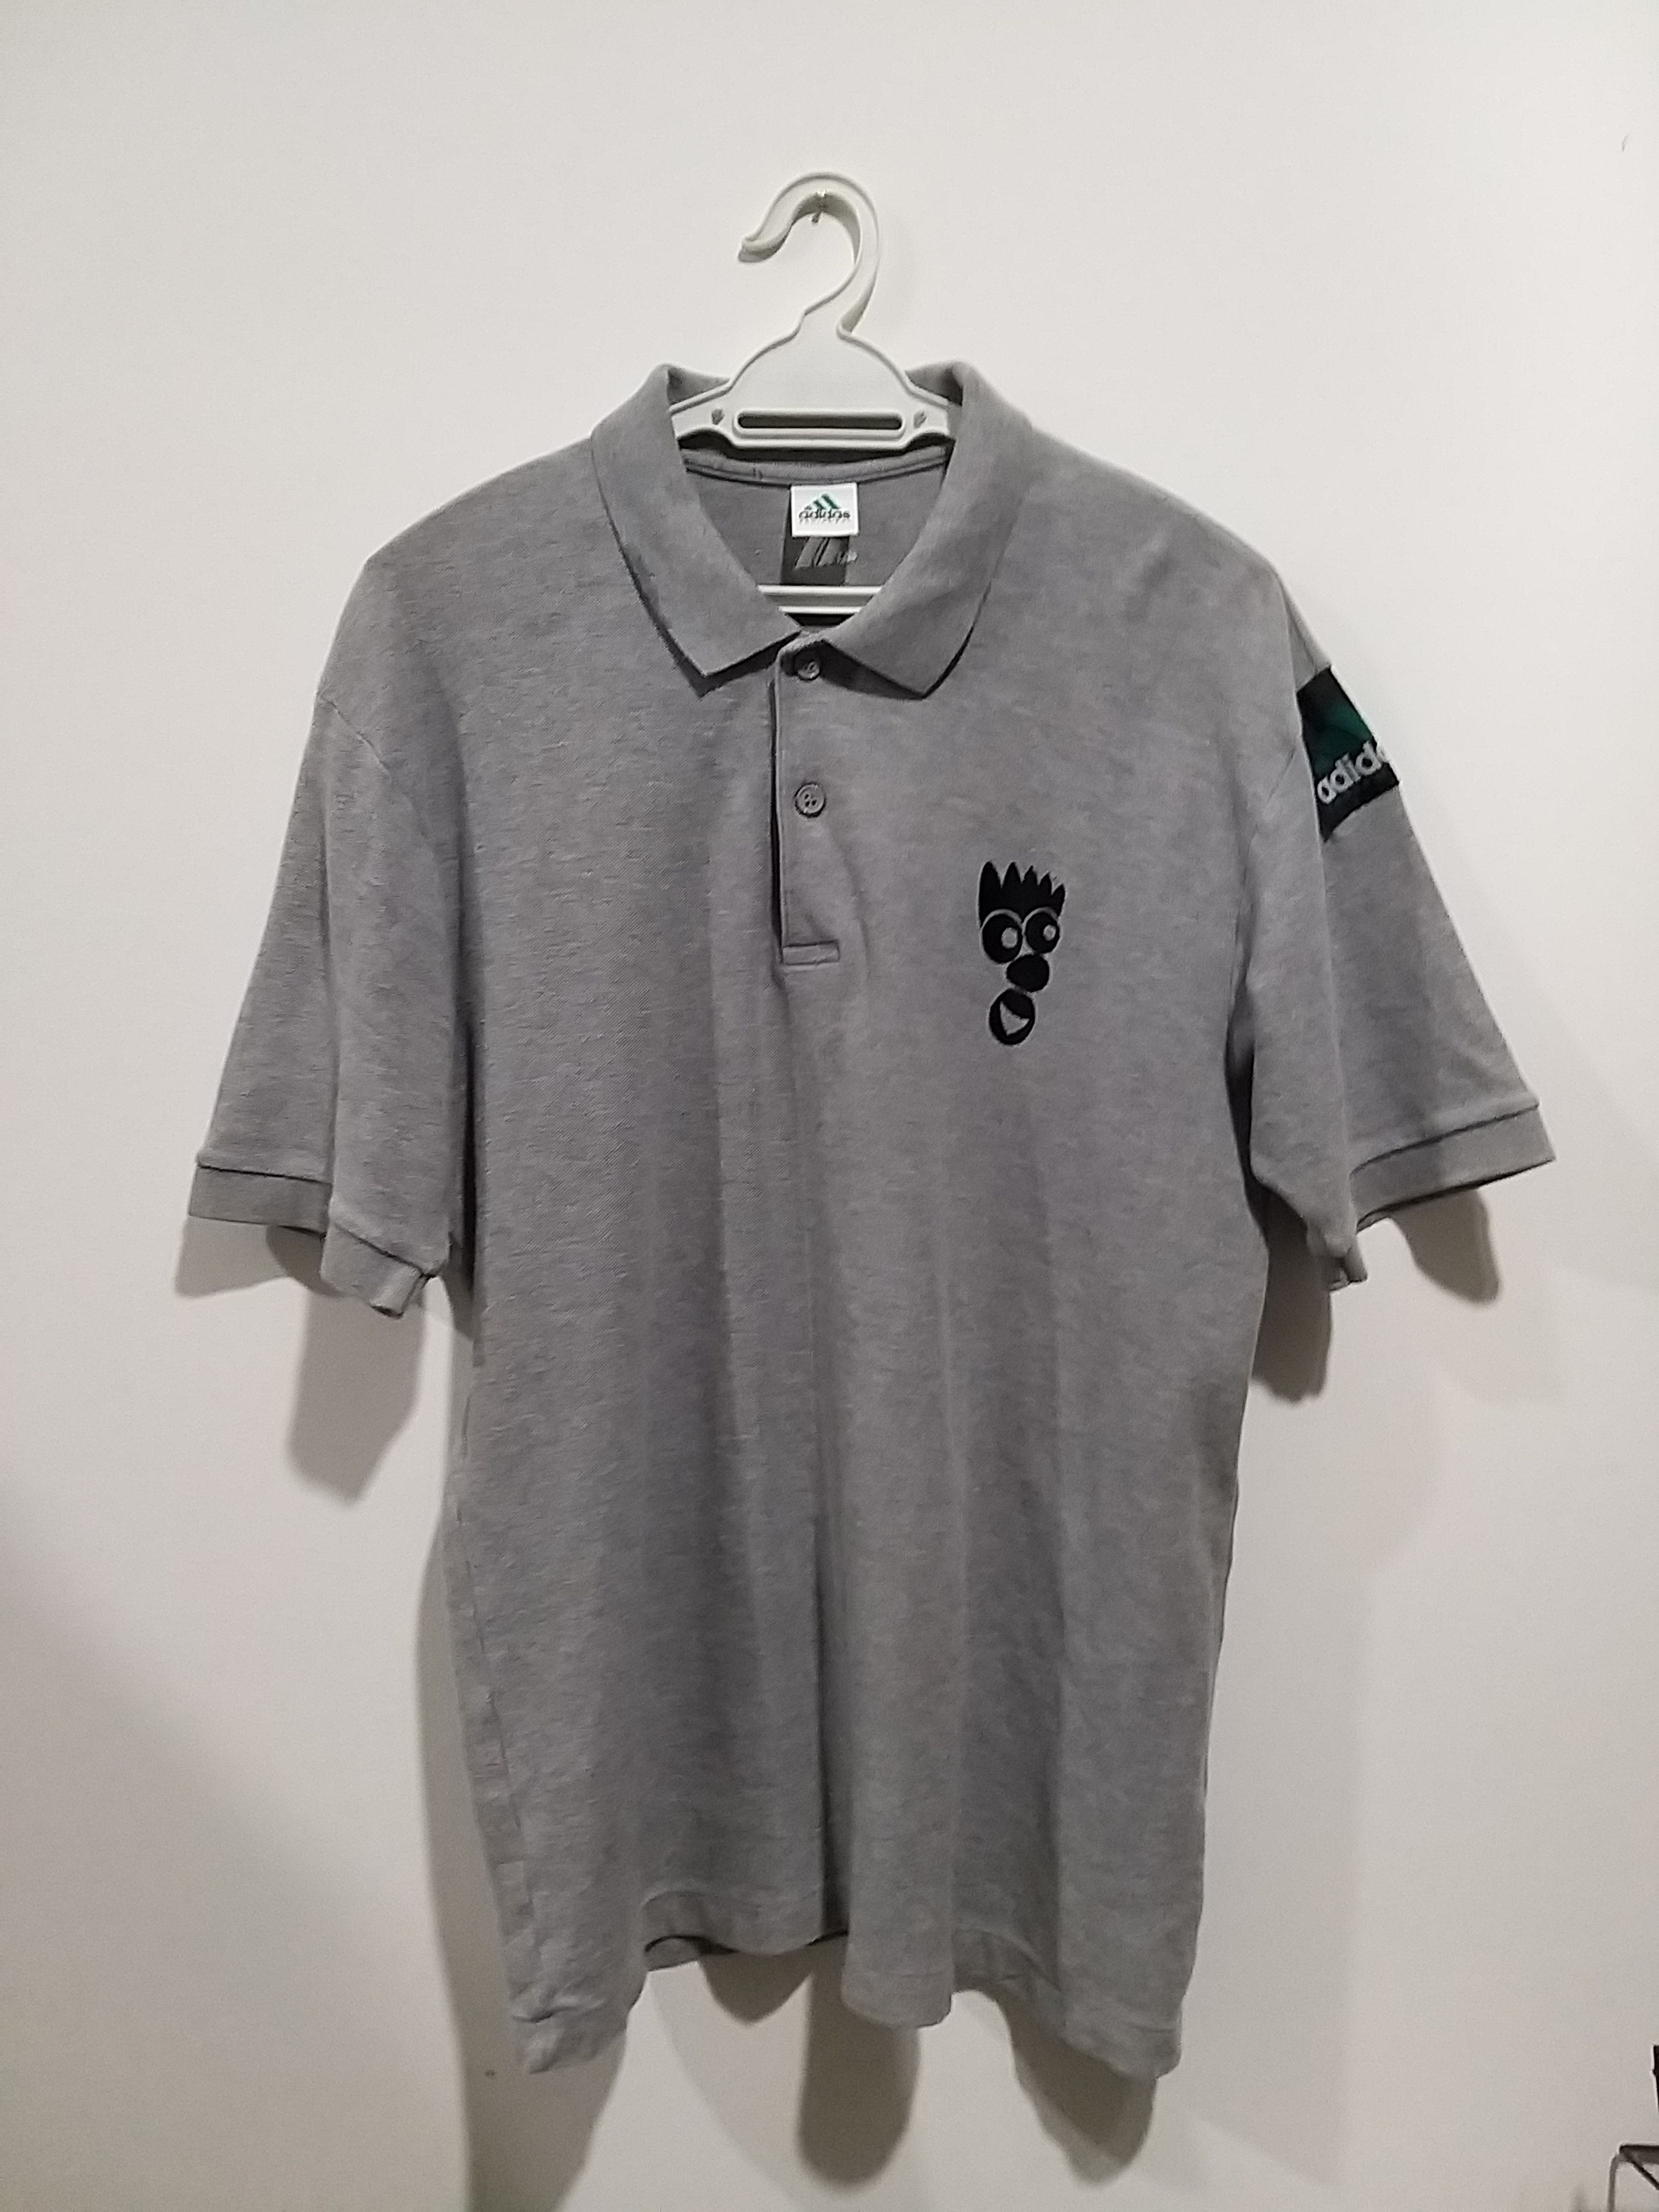 Adidas Adidas Vintage Polo Tee EQT X Fido Dido Made in Japan | Grailed